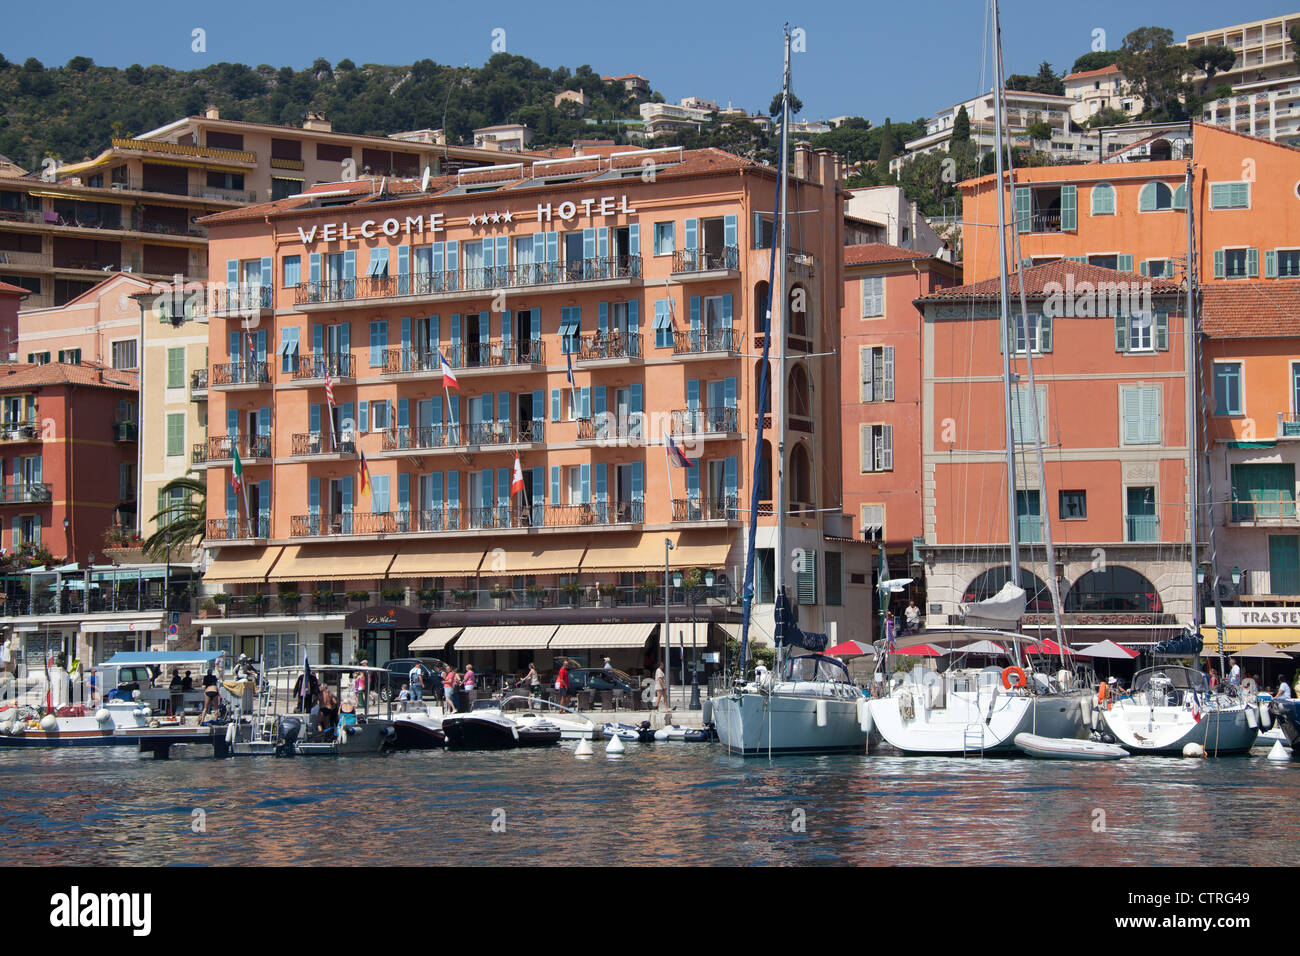 Town of Villefranche, France. Picturesque summer view of Villefranche-Sur-Mer waterfront and harbour. Stock Photo